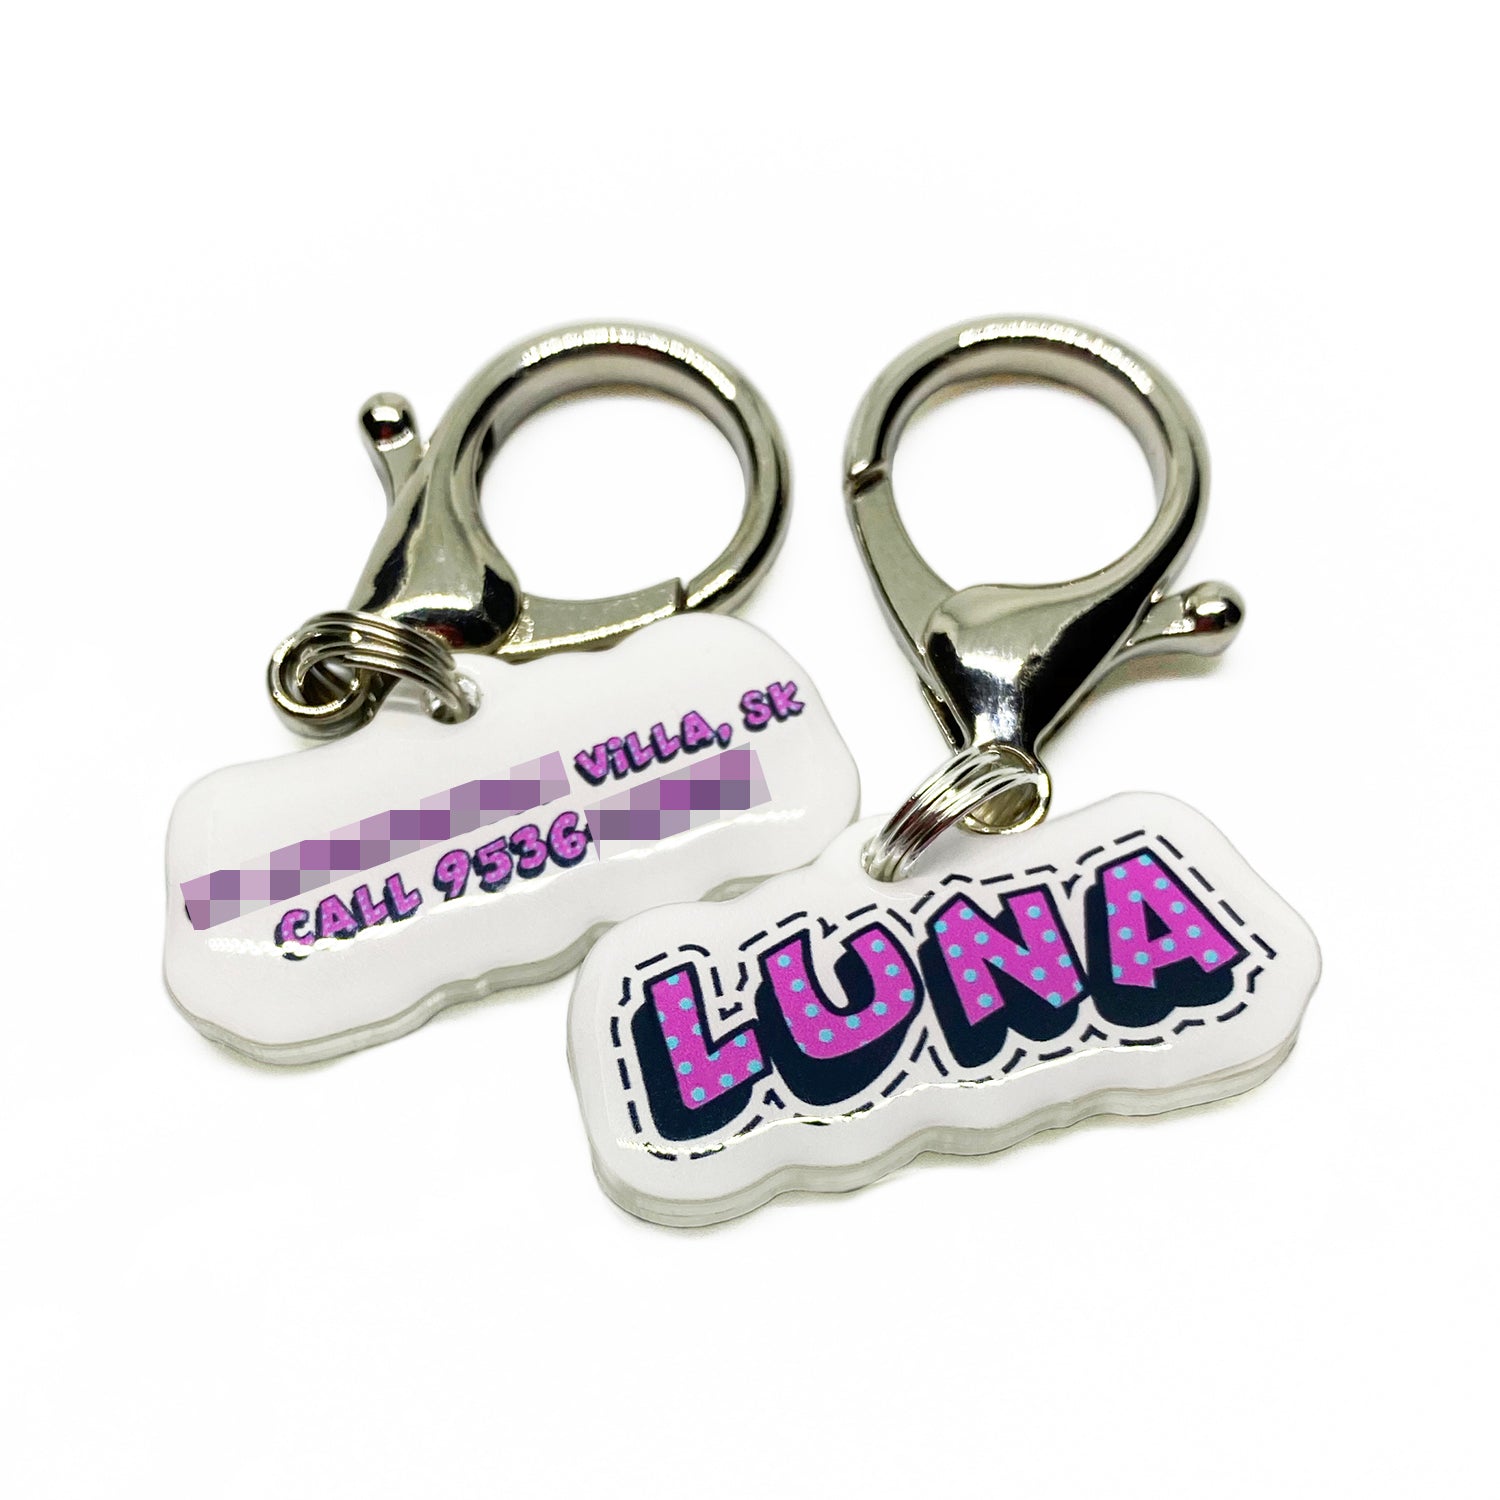 Pink Comic Font Pet ID Tag by Bashtags